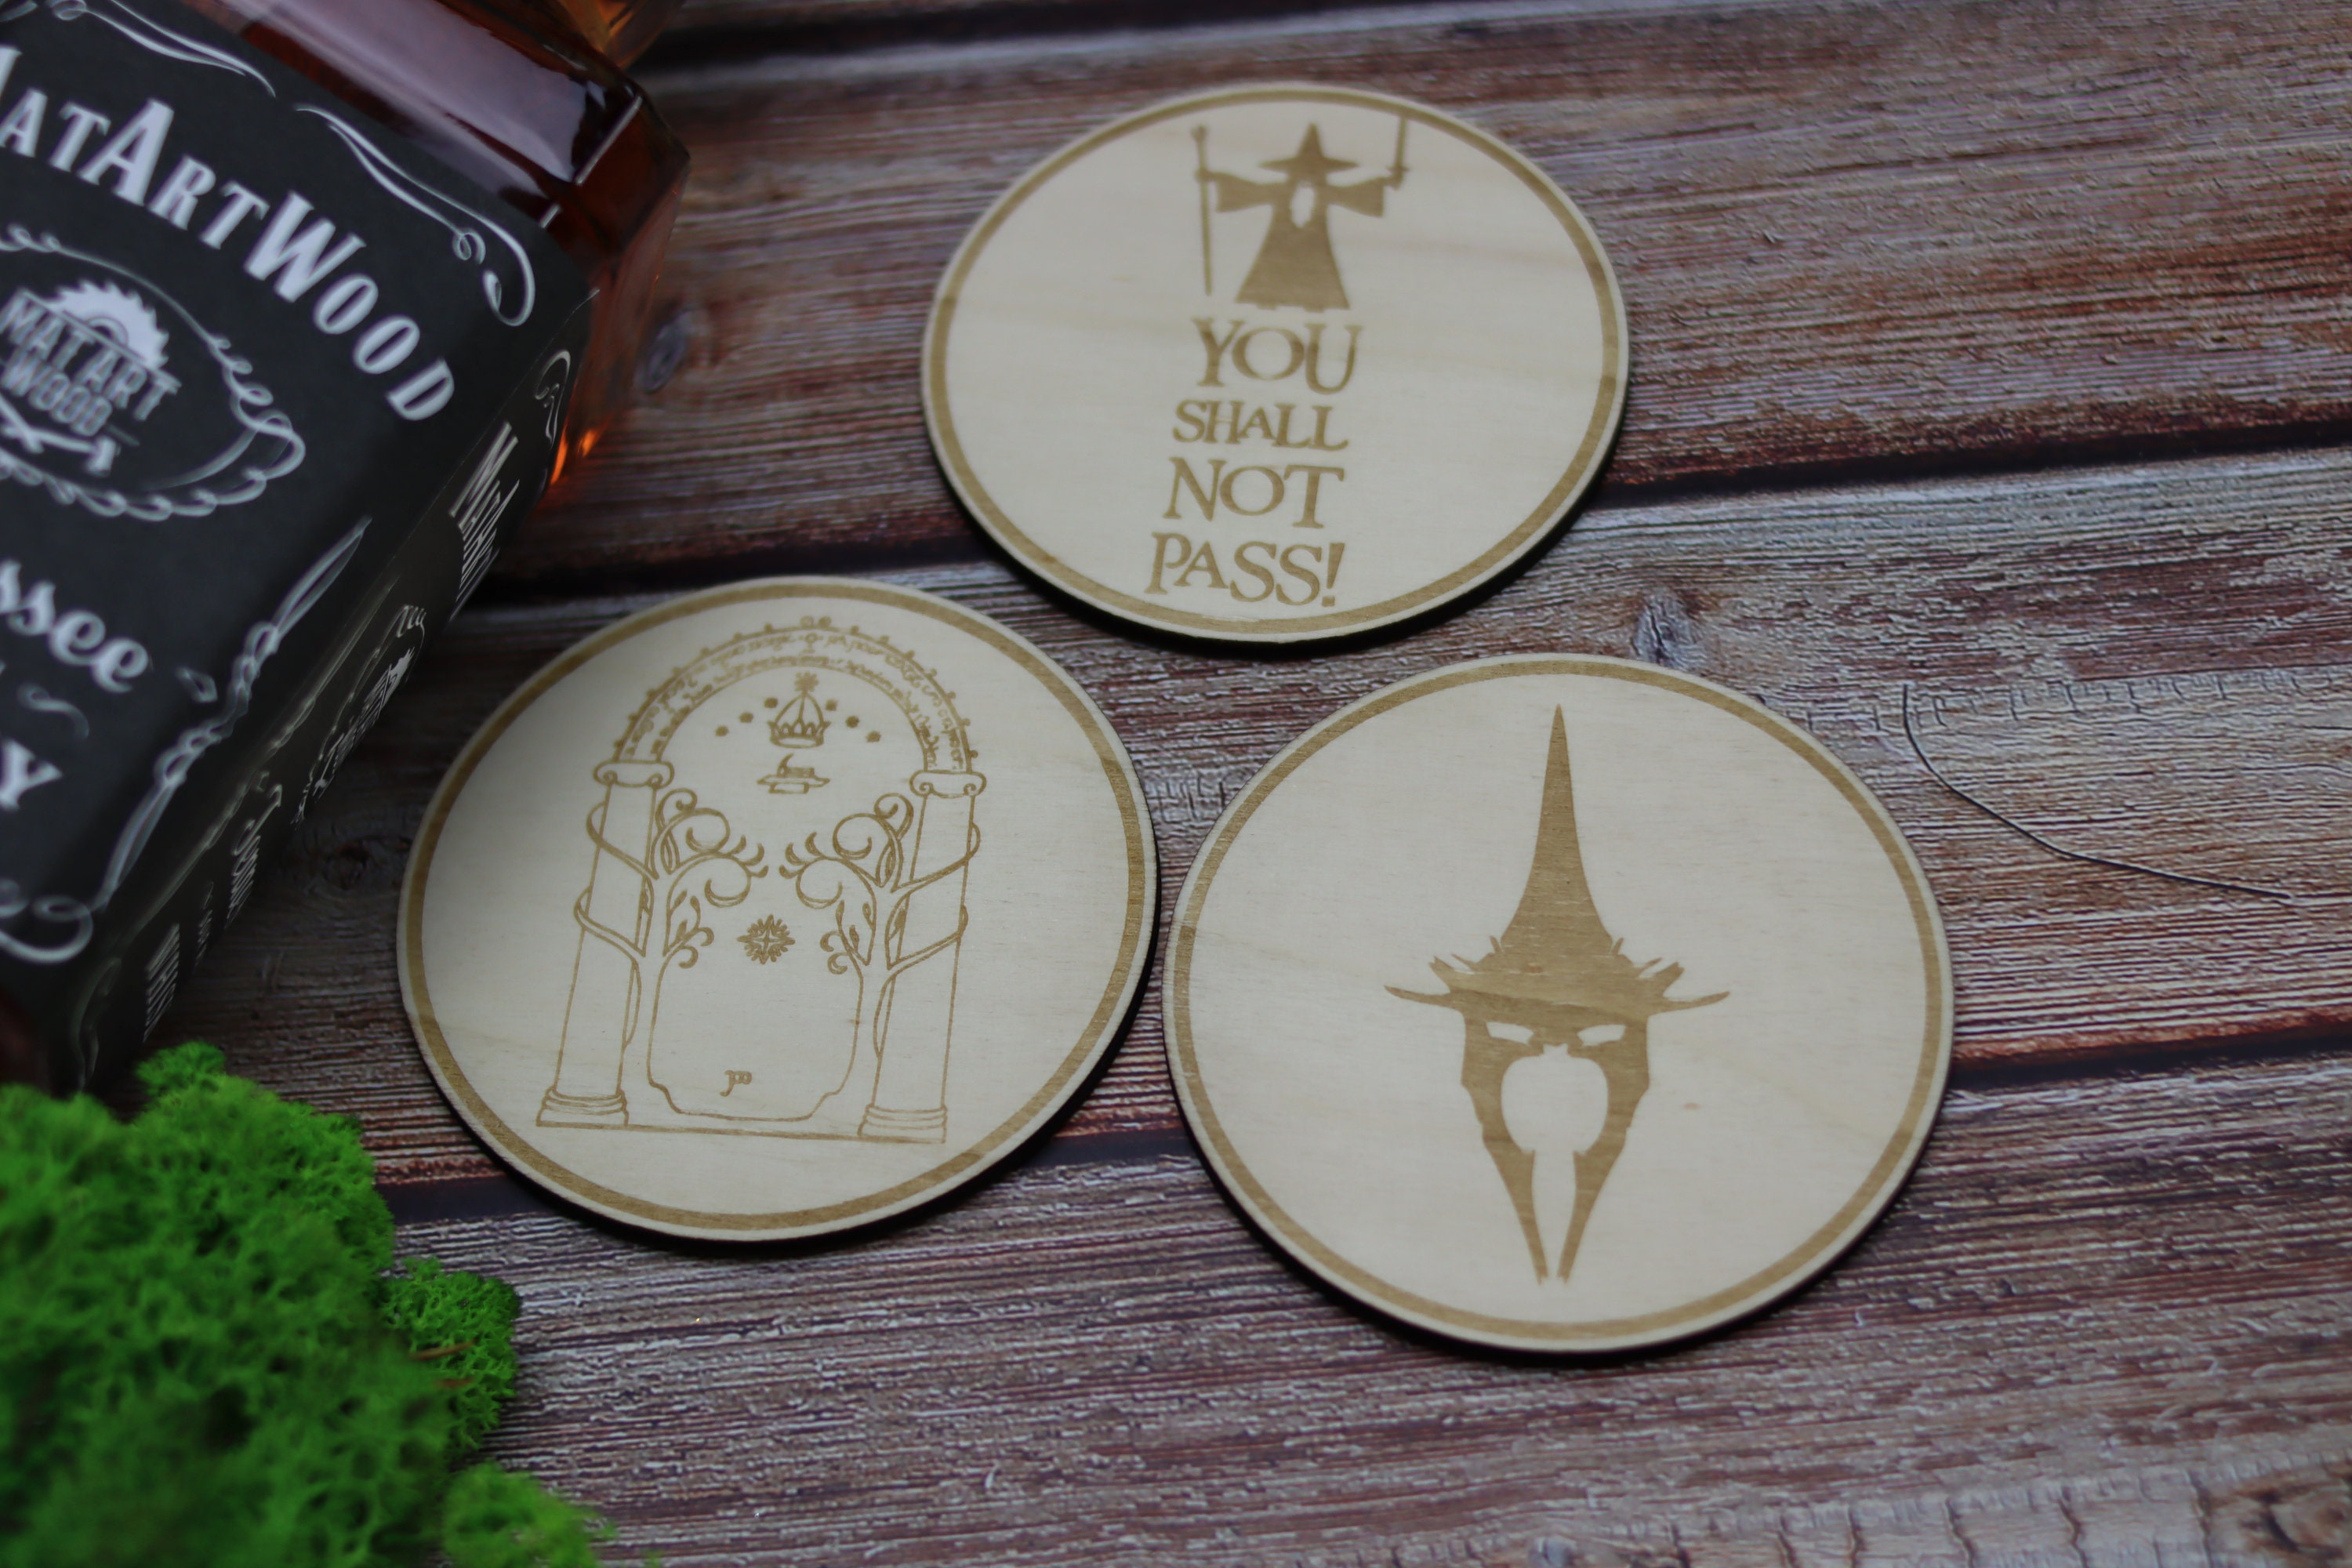 Lord of the Rings Inspired Coasters Fathers Day Gift Ideas, Fathers Day Gift,  Lord of the Rings Fan, Coaster Gift Set, LOTR Gift, Hobbit 